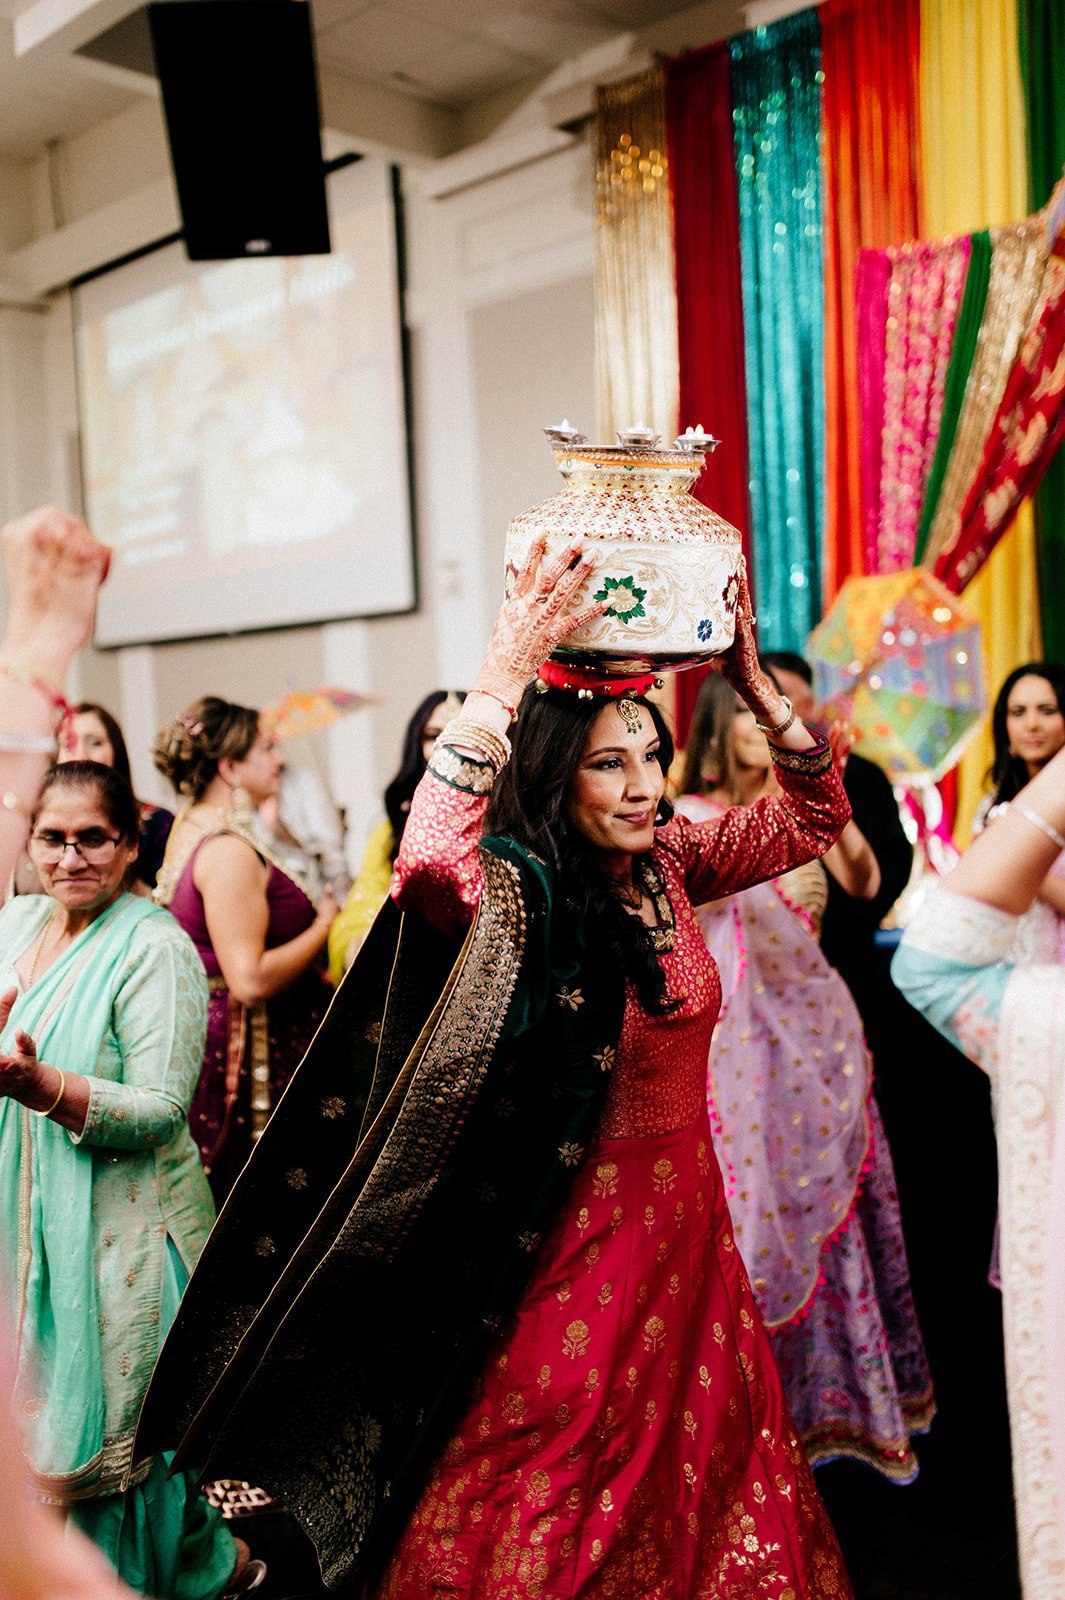 A indian woman dances with a jug on her head in an indian ceremony